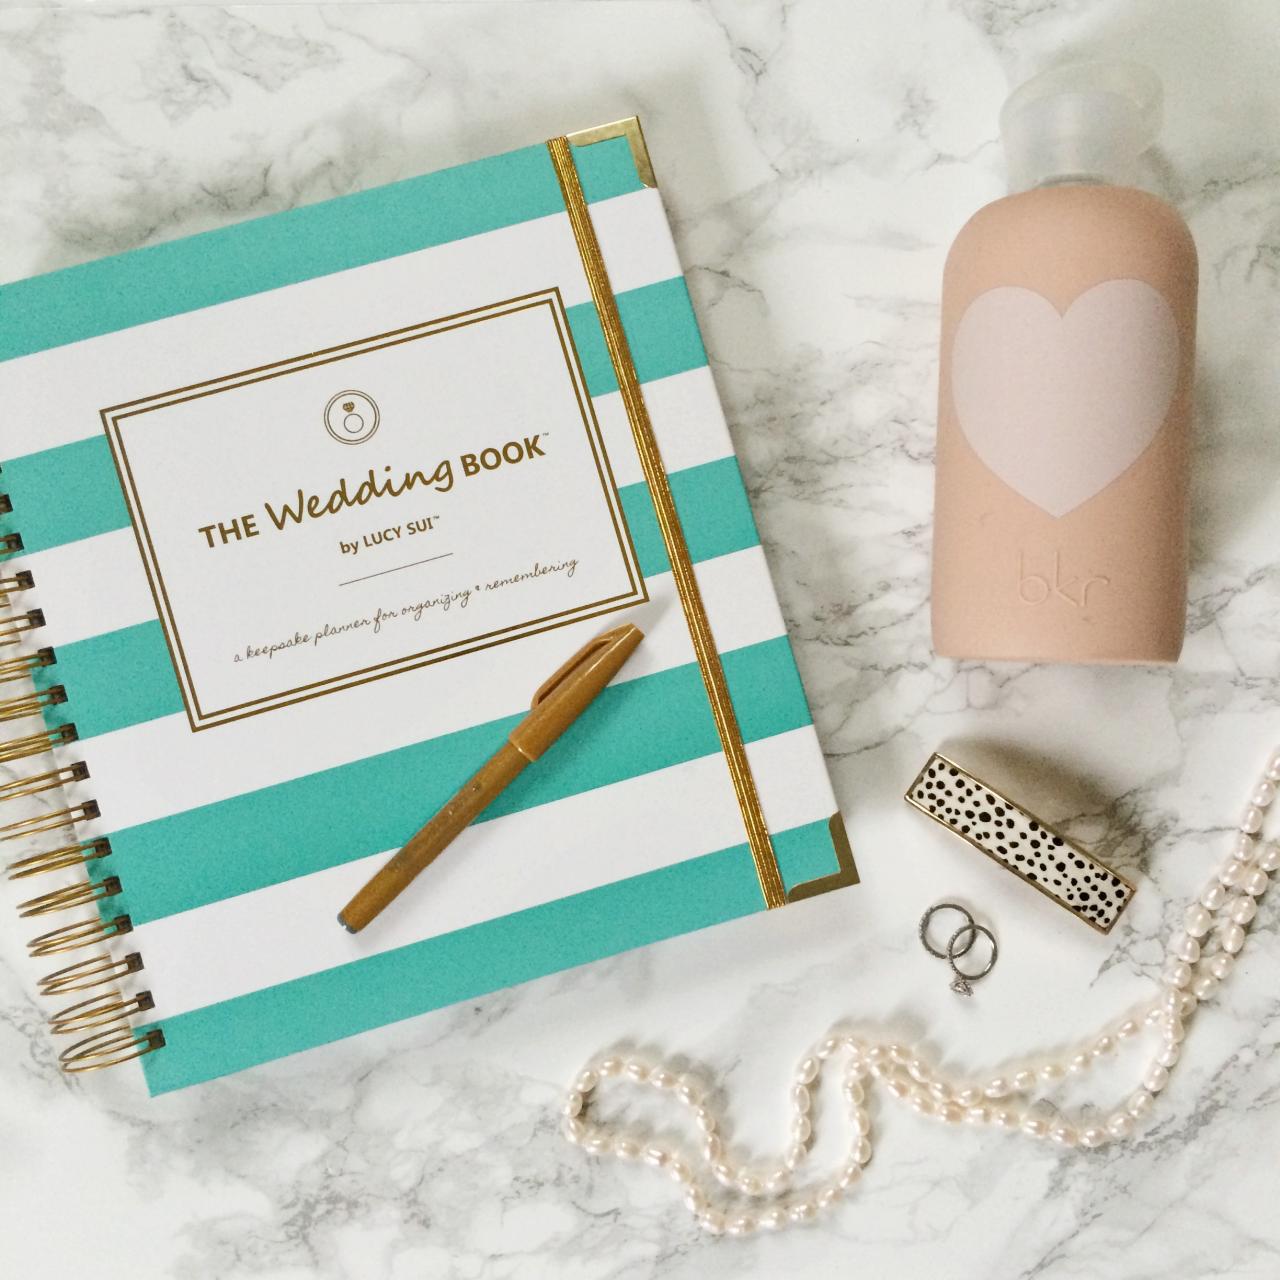 Newly engaged? Get started on wedding planning with these top tips